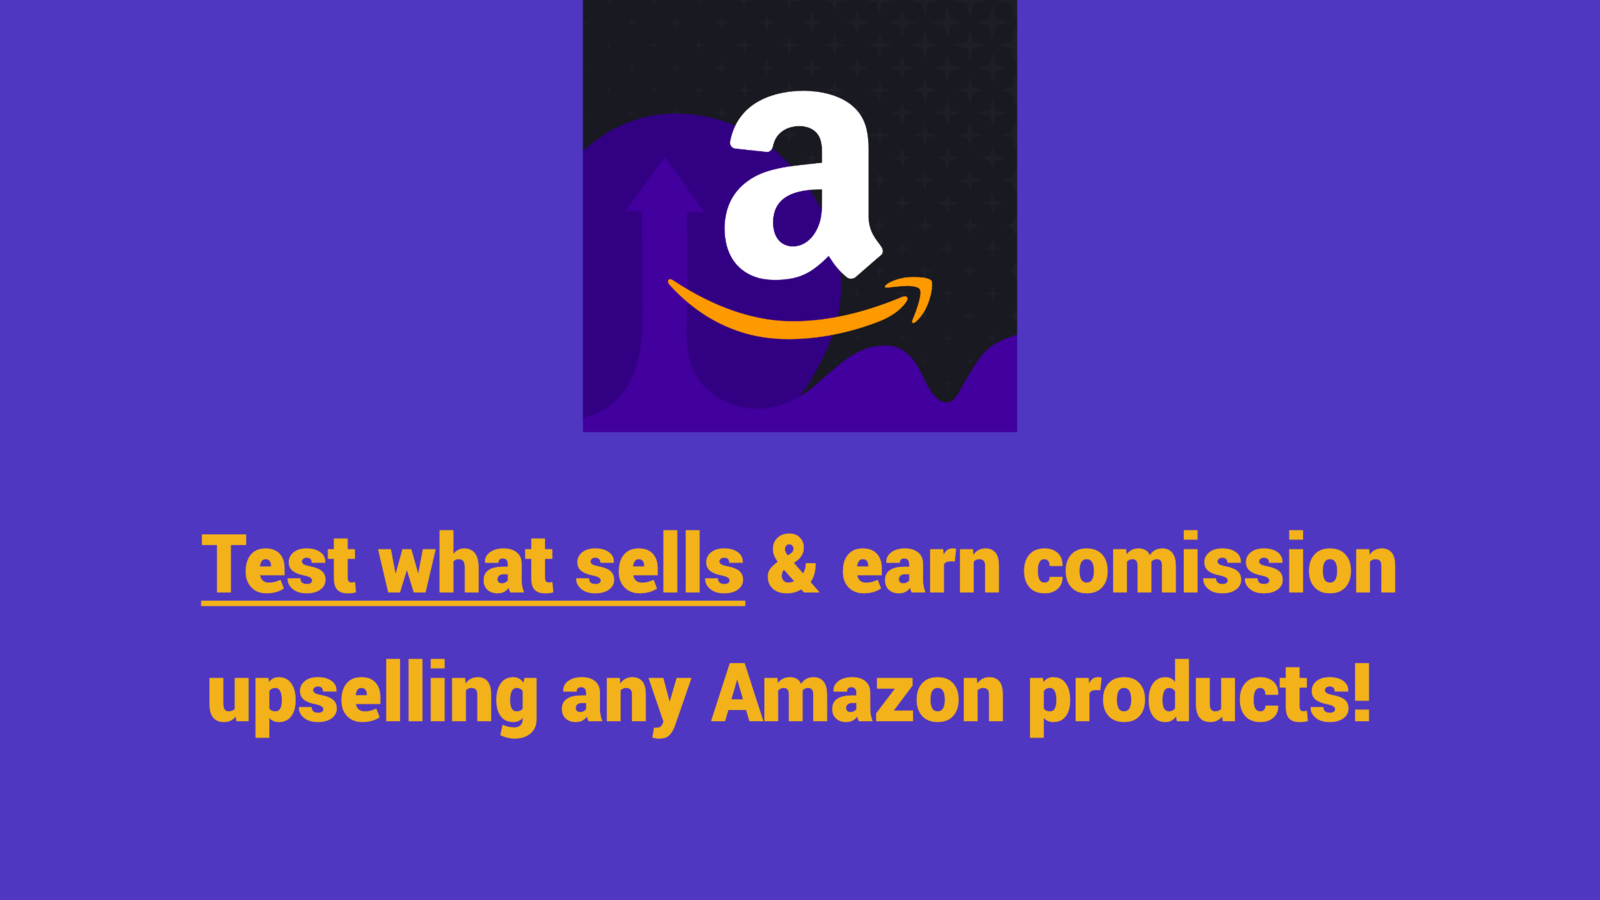 Test what sells and earn commission upselling Amazon products